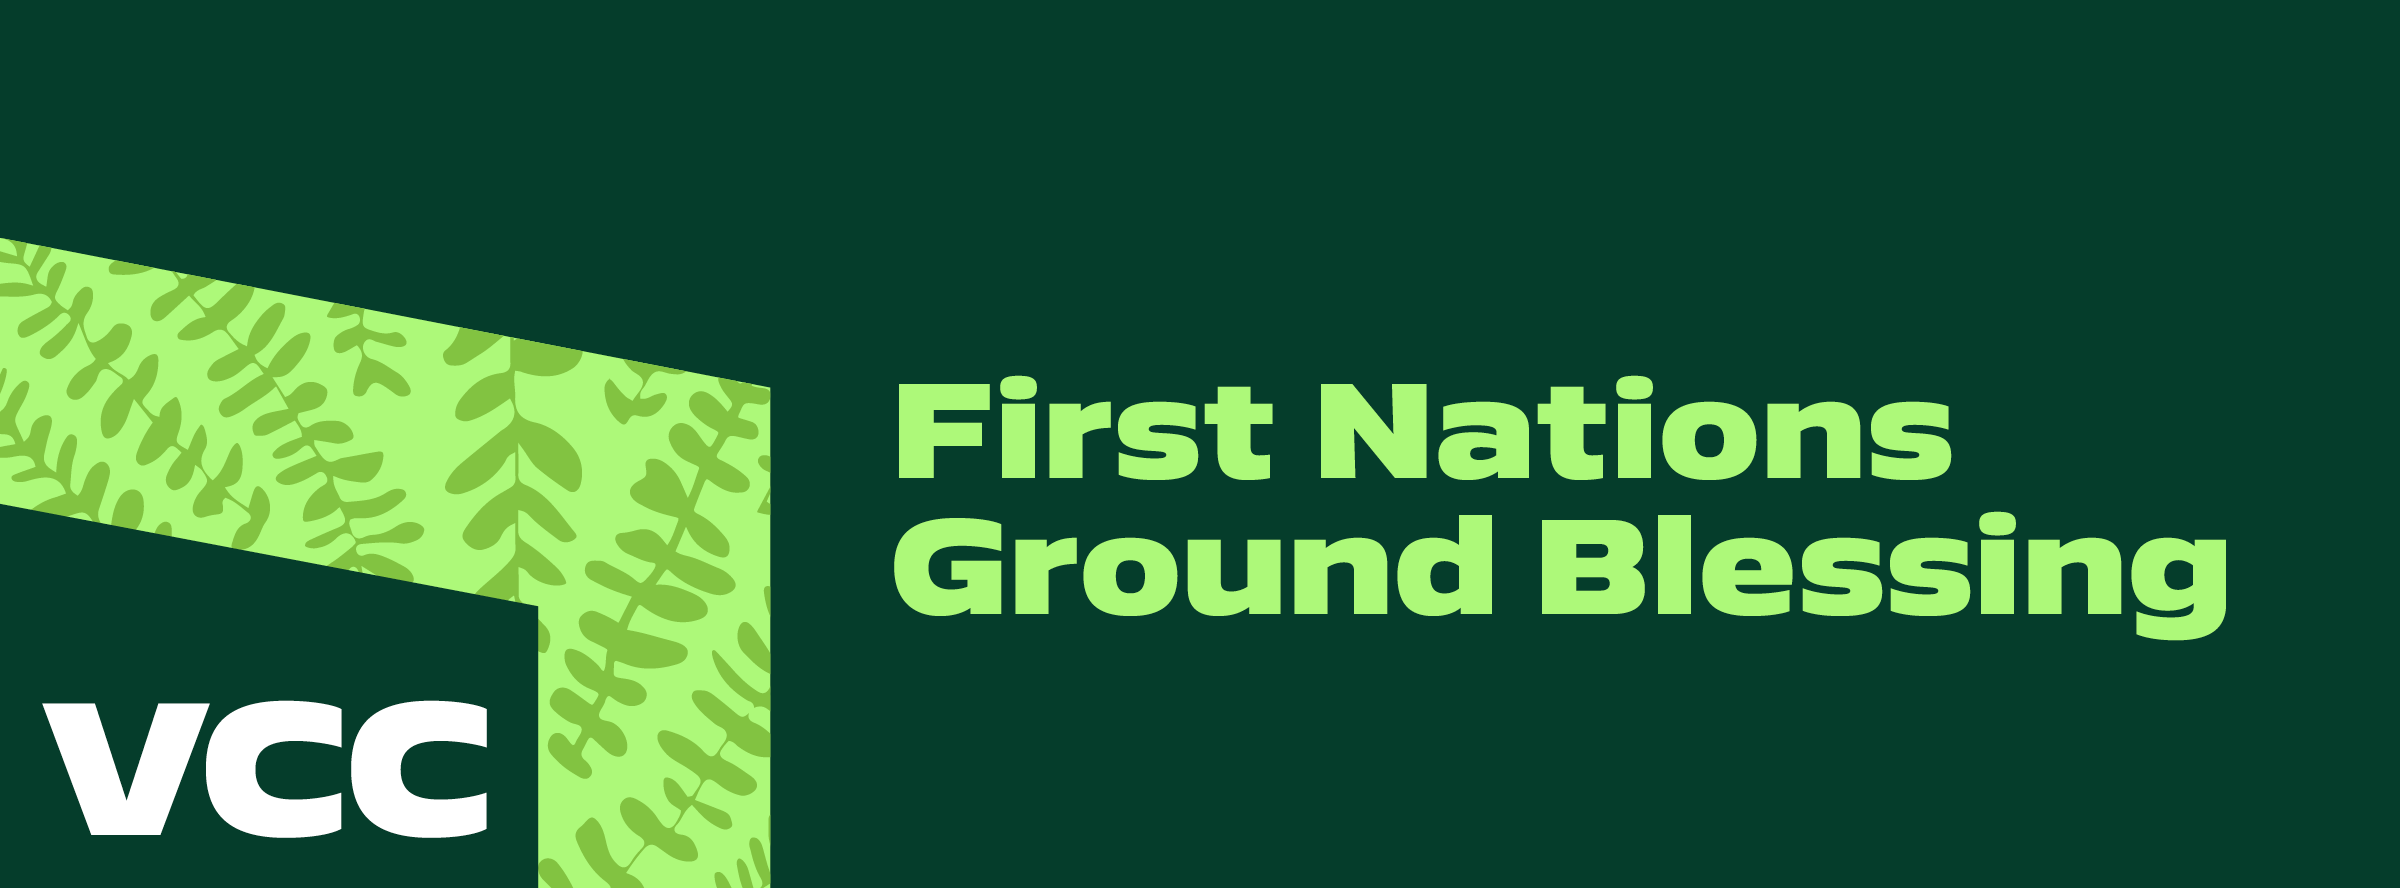 First Nations Ground Blessing Header Image